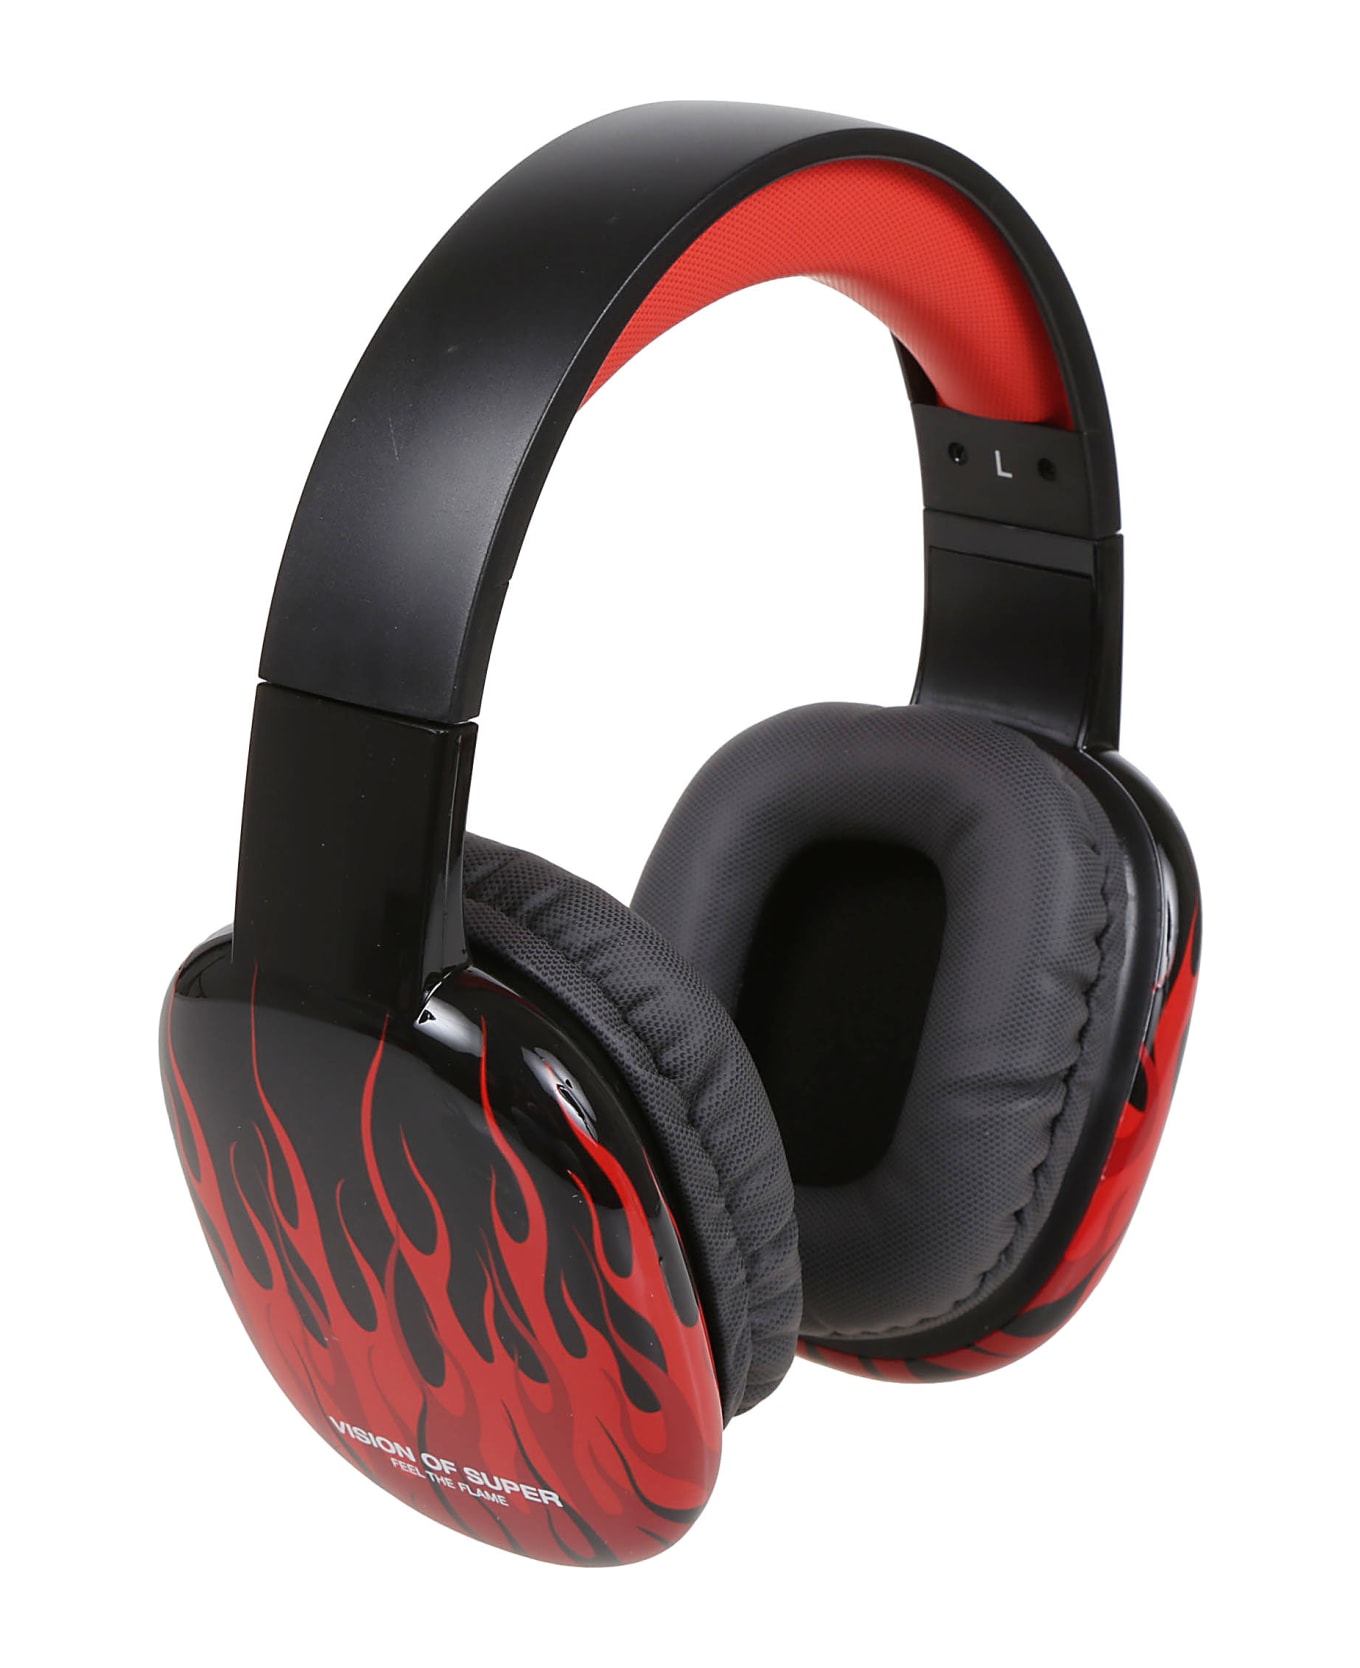 Vision of Super Black Headphones With Red Flames And White Logo - Black リング